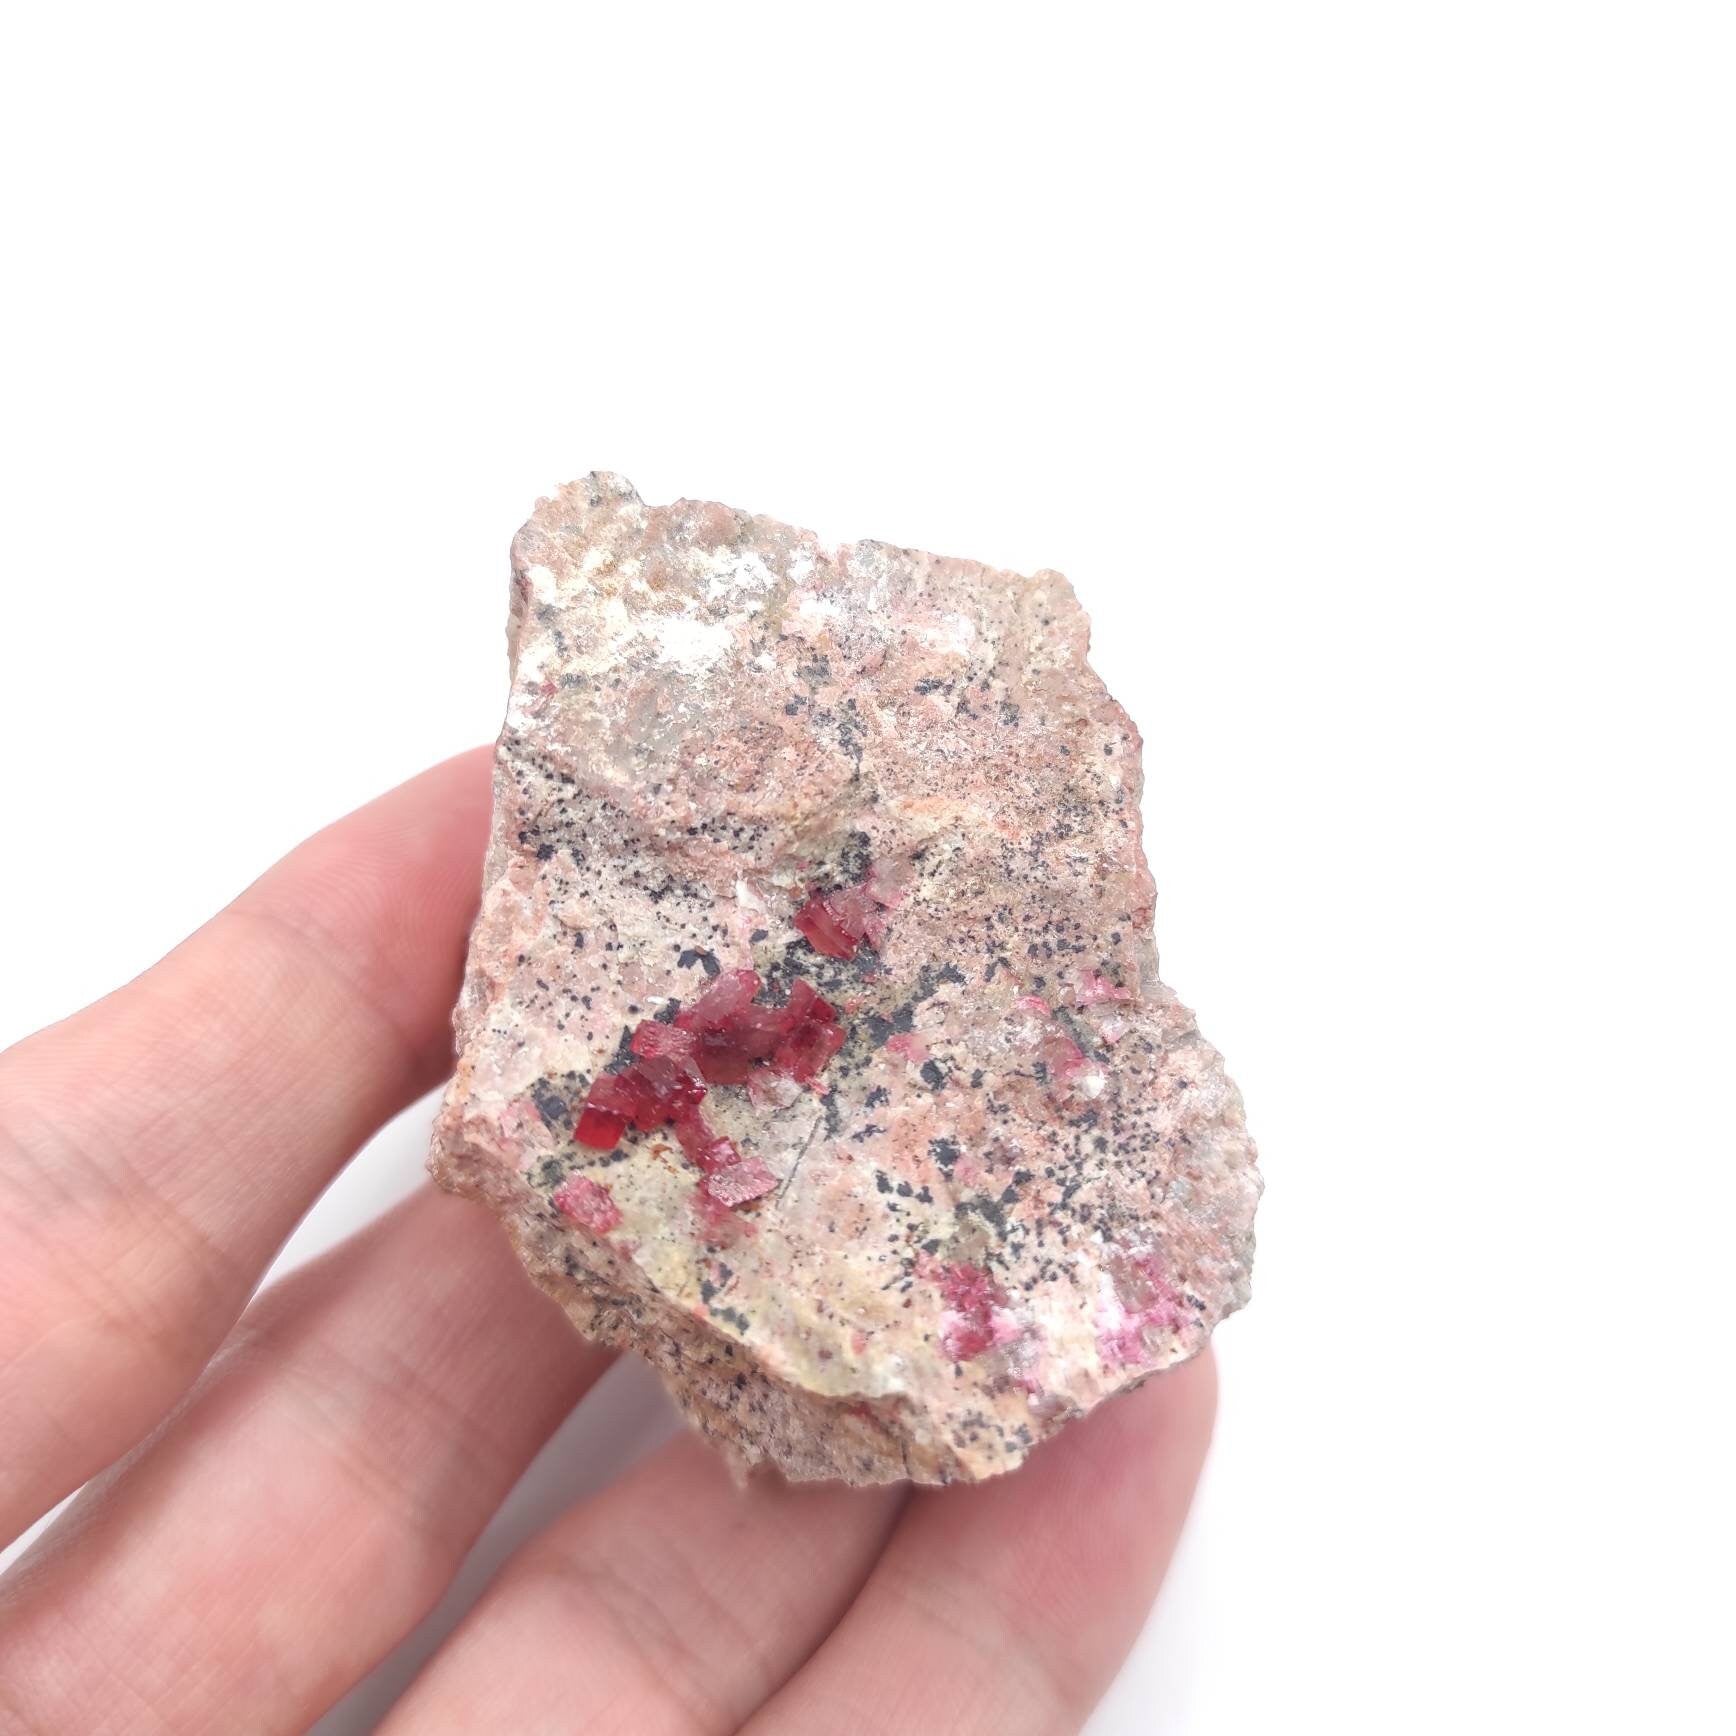 93g Roselite in Matrix from Bou Azzer, Morocco - Rare Pink Roselite Mineral - Rare Mineral Specimen - Natural Crystals - Rough Gemstones